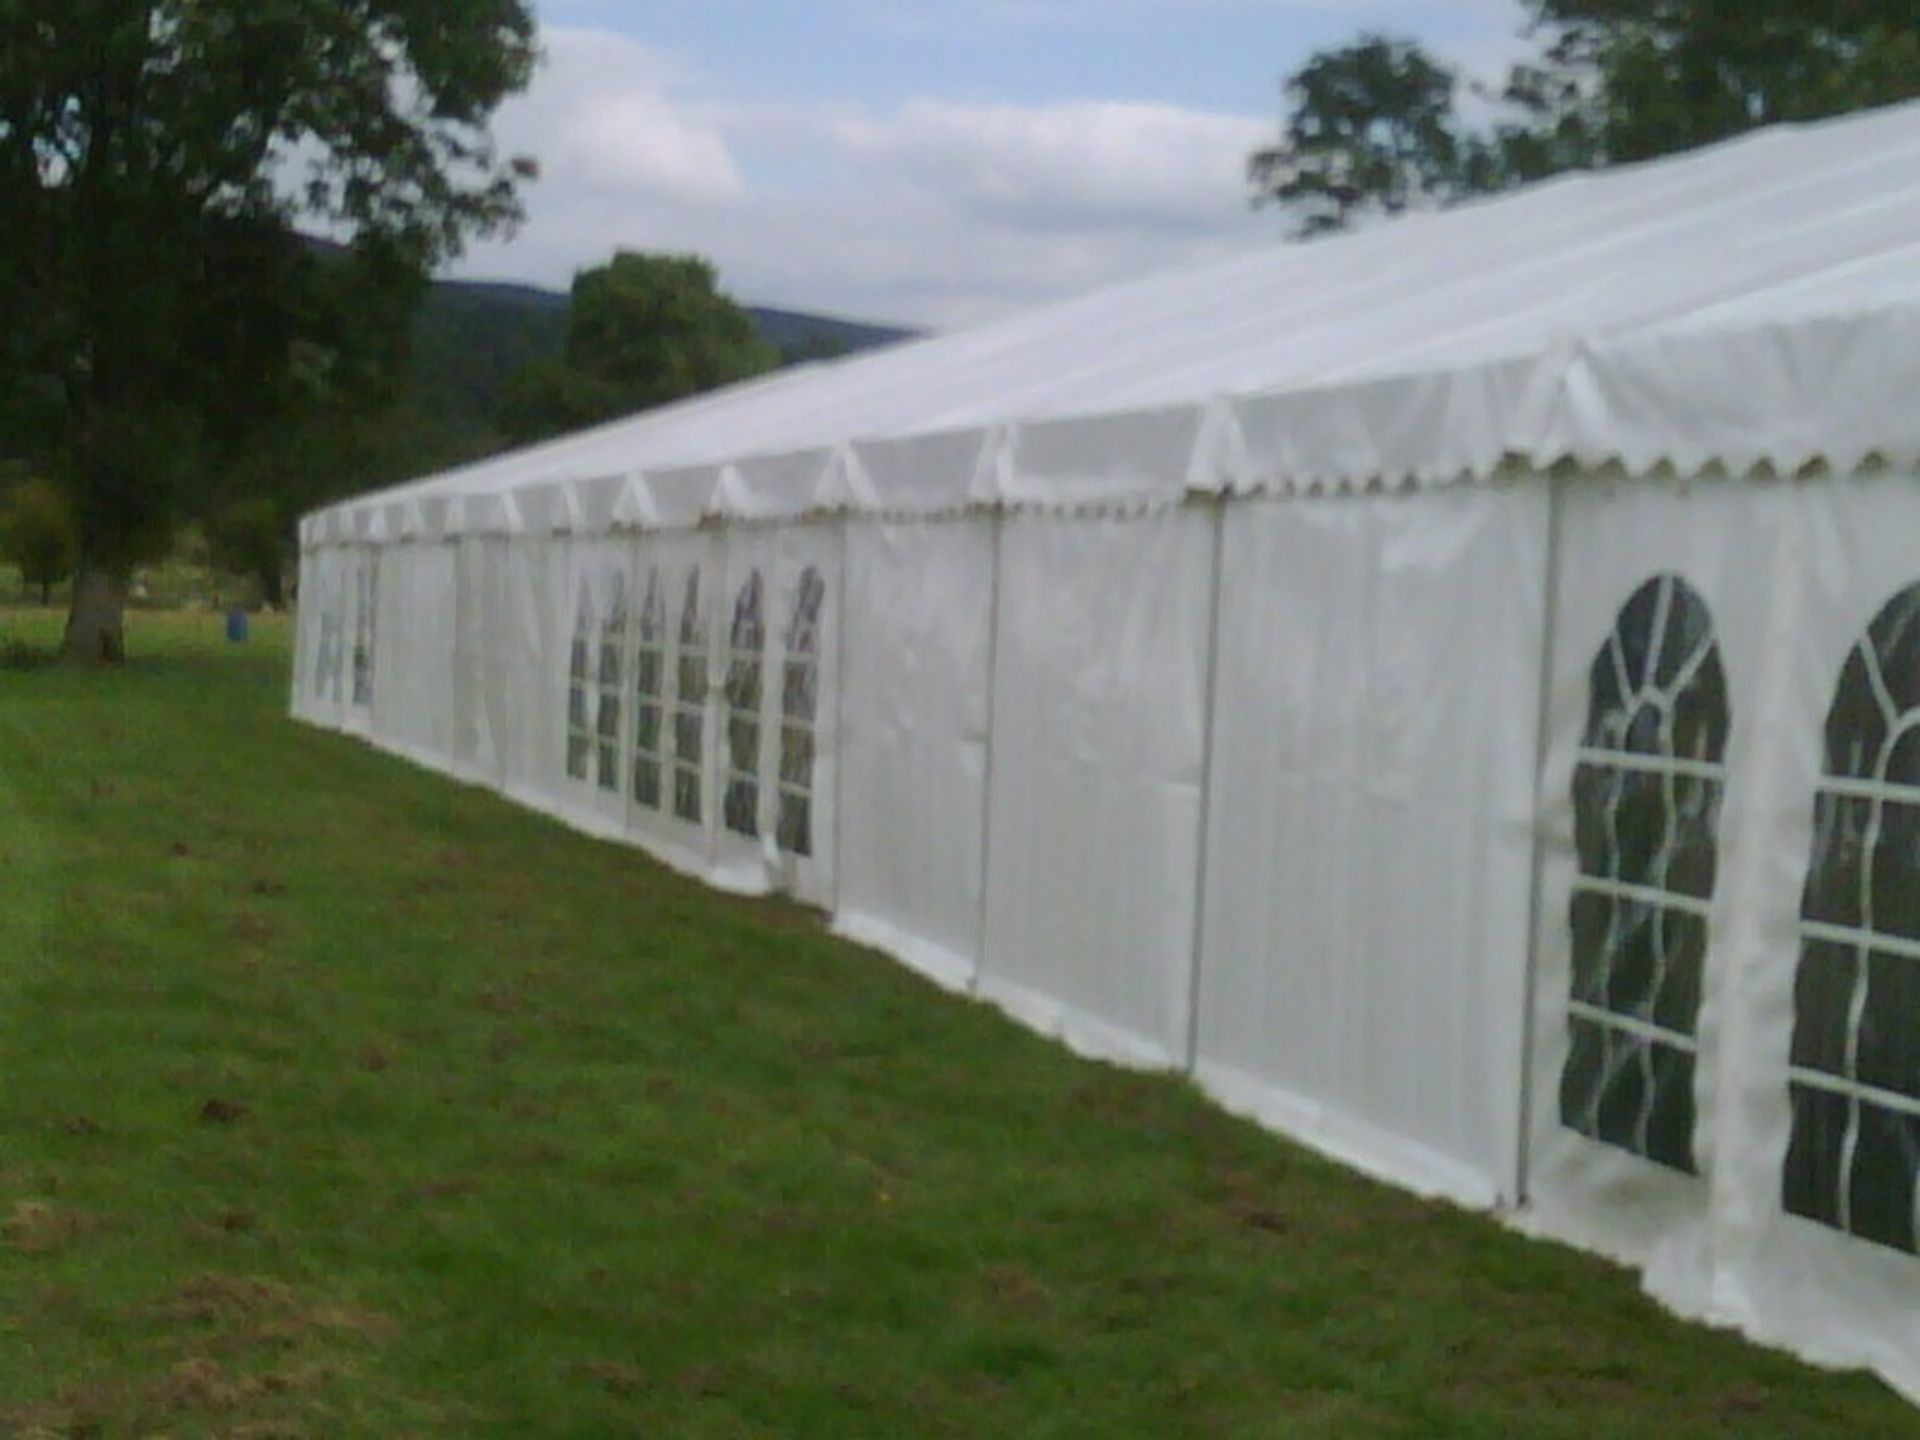 Roda Style Frame Clearspan Marquee 9m x 30mPVC Roof & Walls – Item is image in the centre of picture - Image 3 of 5